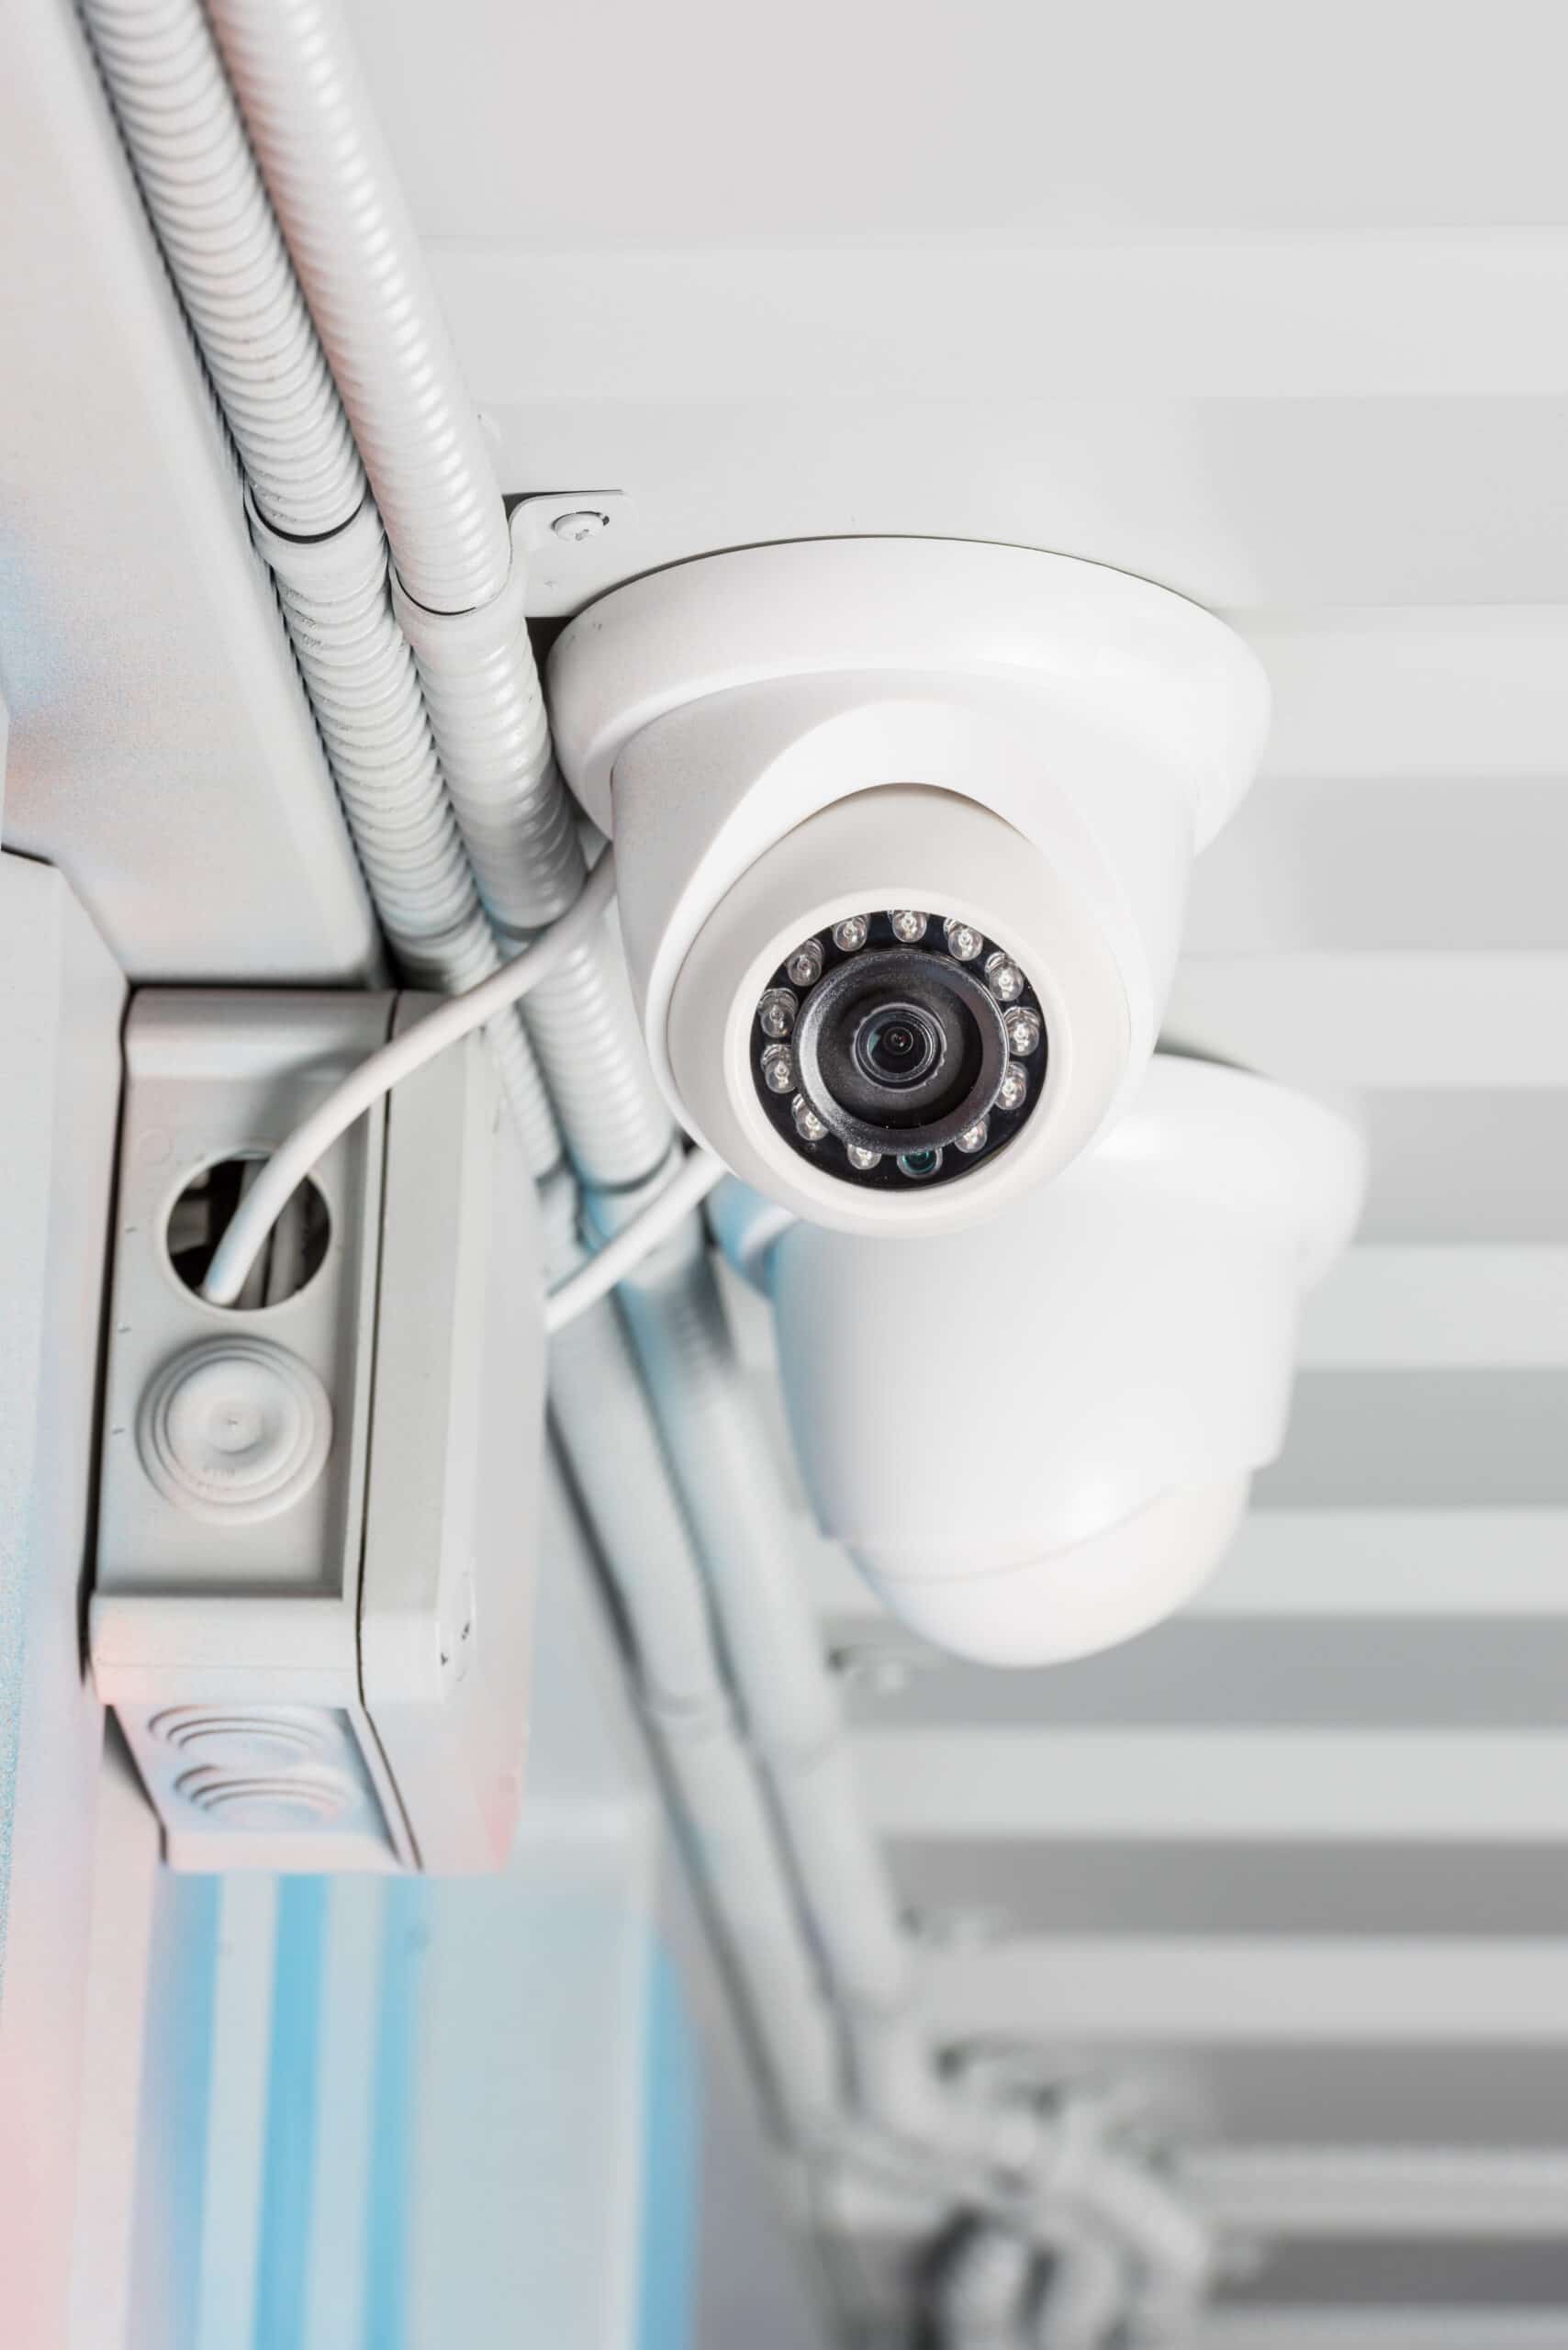  CCTV, Alarms, and Security System Design, Security Installers, and Maintenance in Michigan and Metro Detroit for Residential, Commercial & Industrial properties